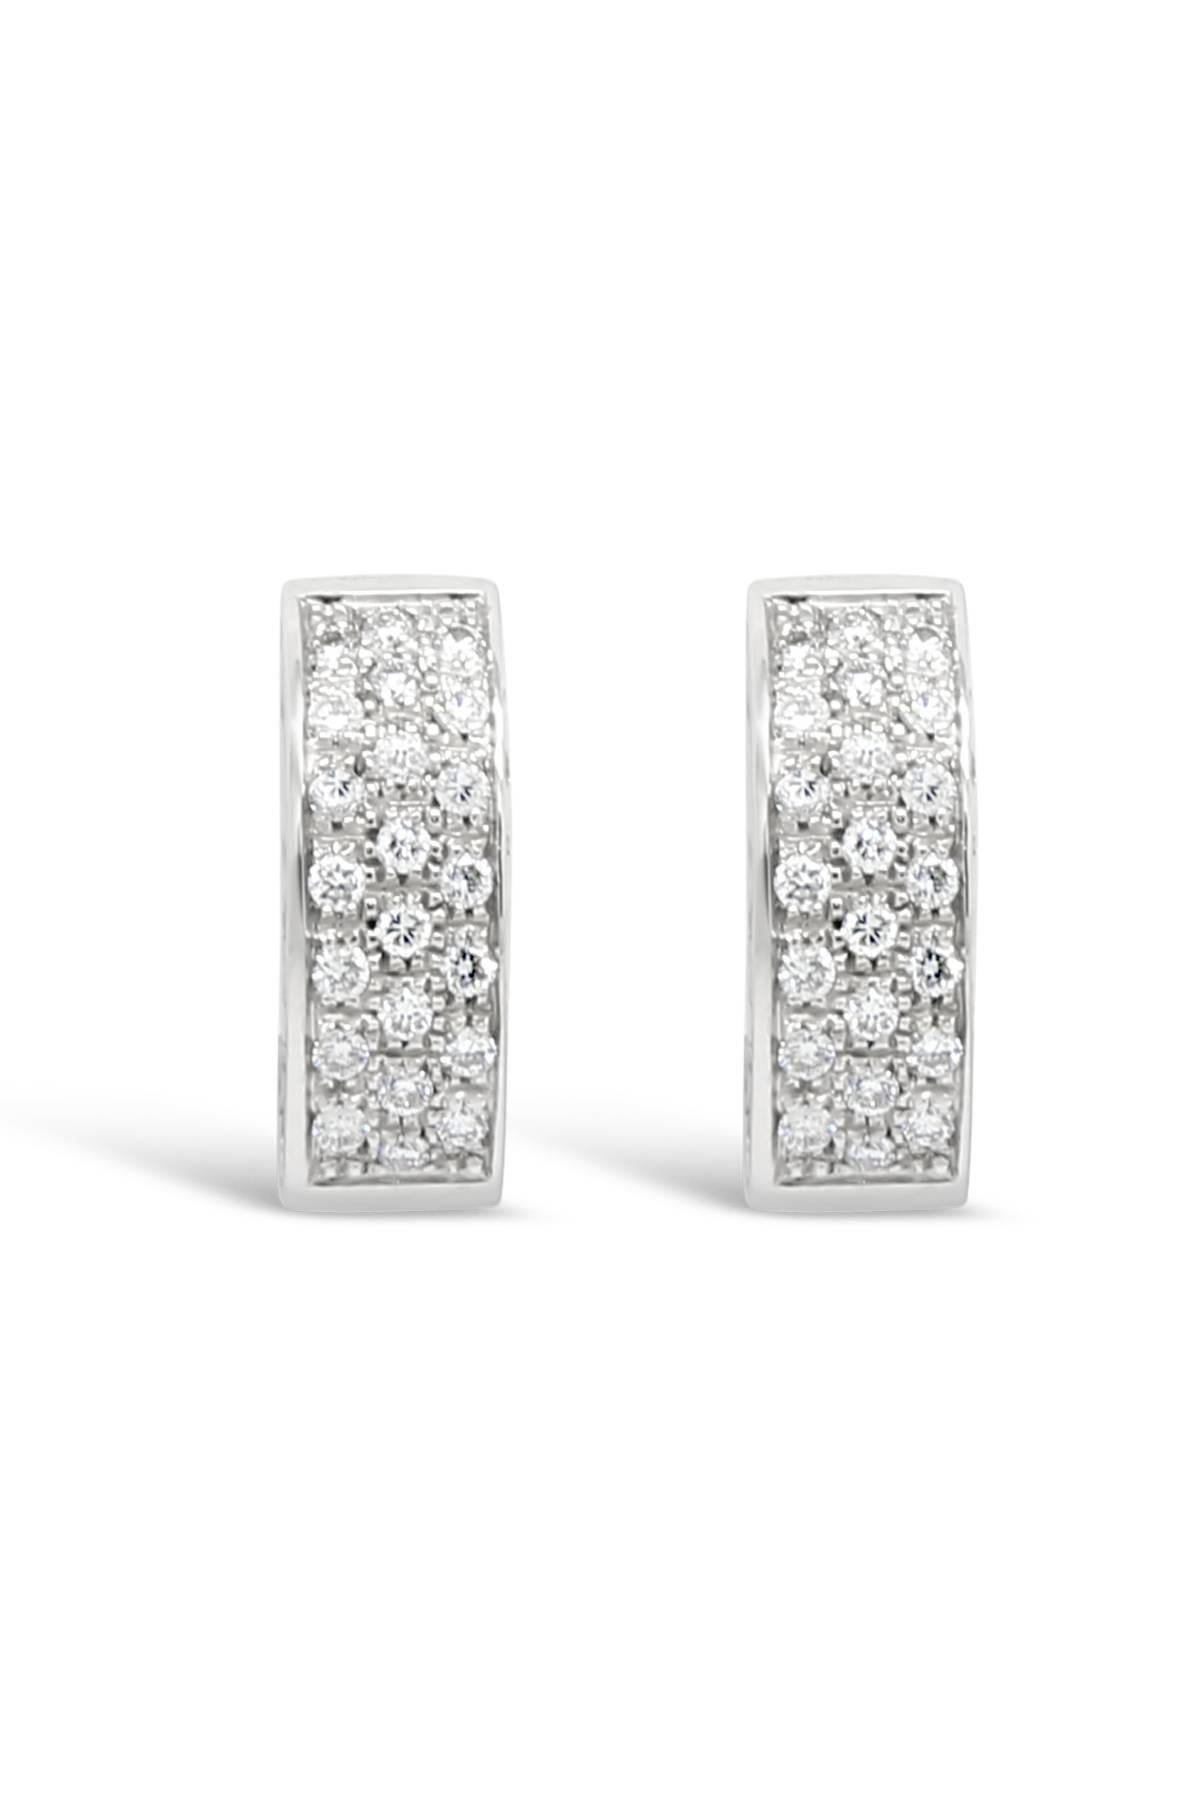 Bright white diamonds Wide hoop hoop earrings by FERRUCCI perfect hand craftsmanship,

Made in Italy with Love

Diamonds total carat weight 1.00 ct